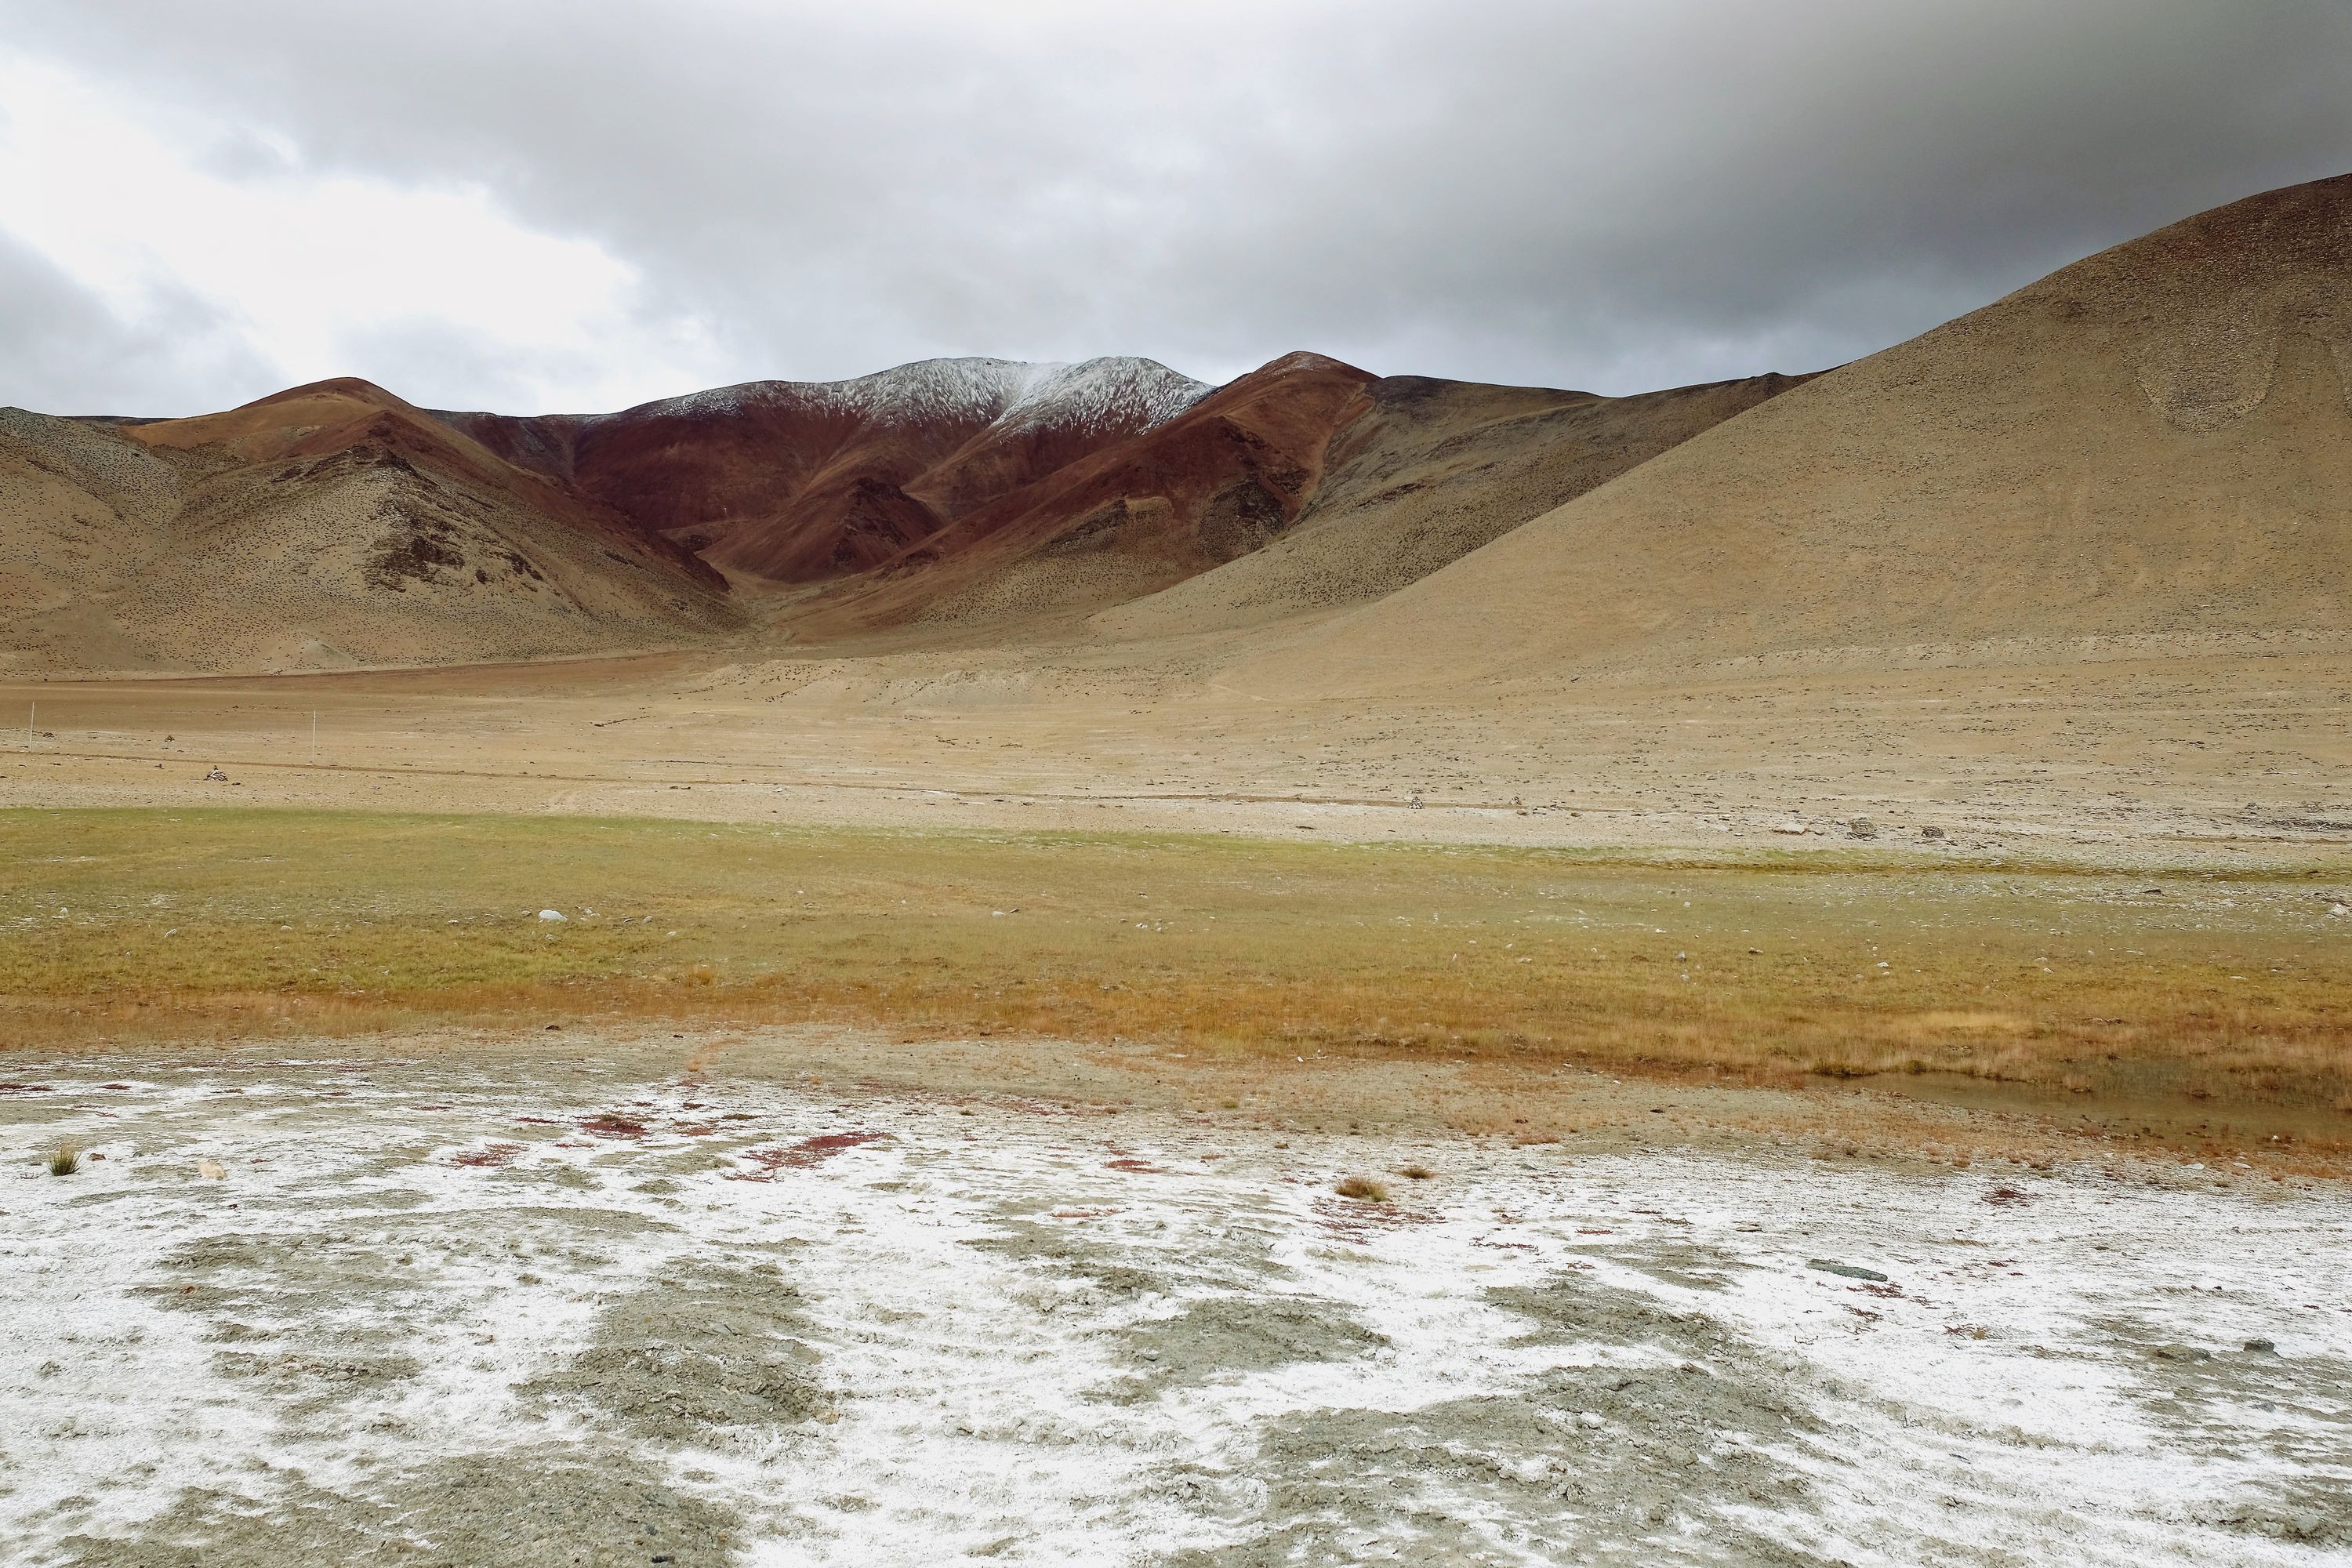 Snow over delicious-looking mountains in Ladakh, India. September 2021.